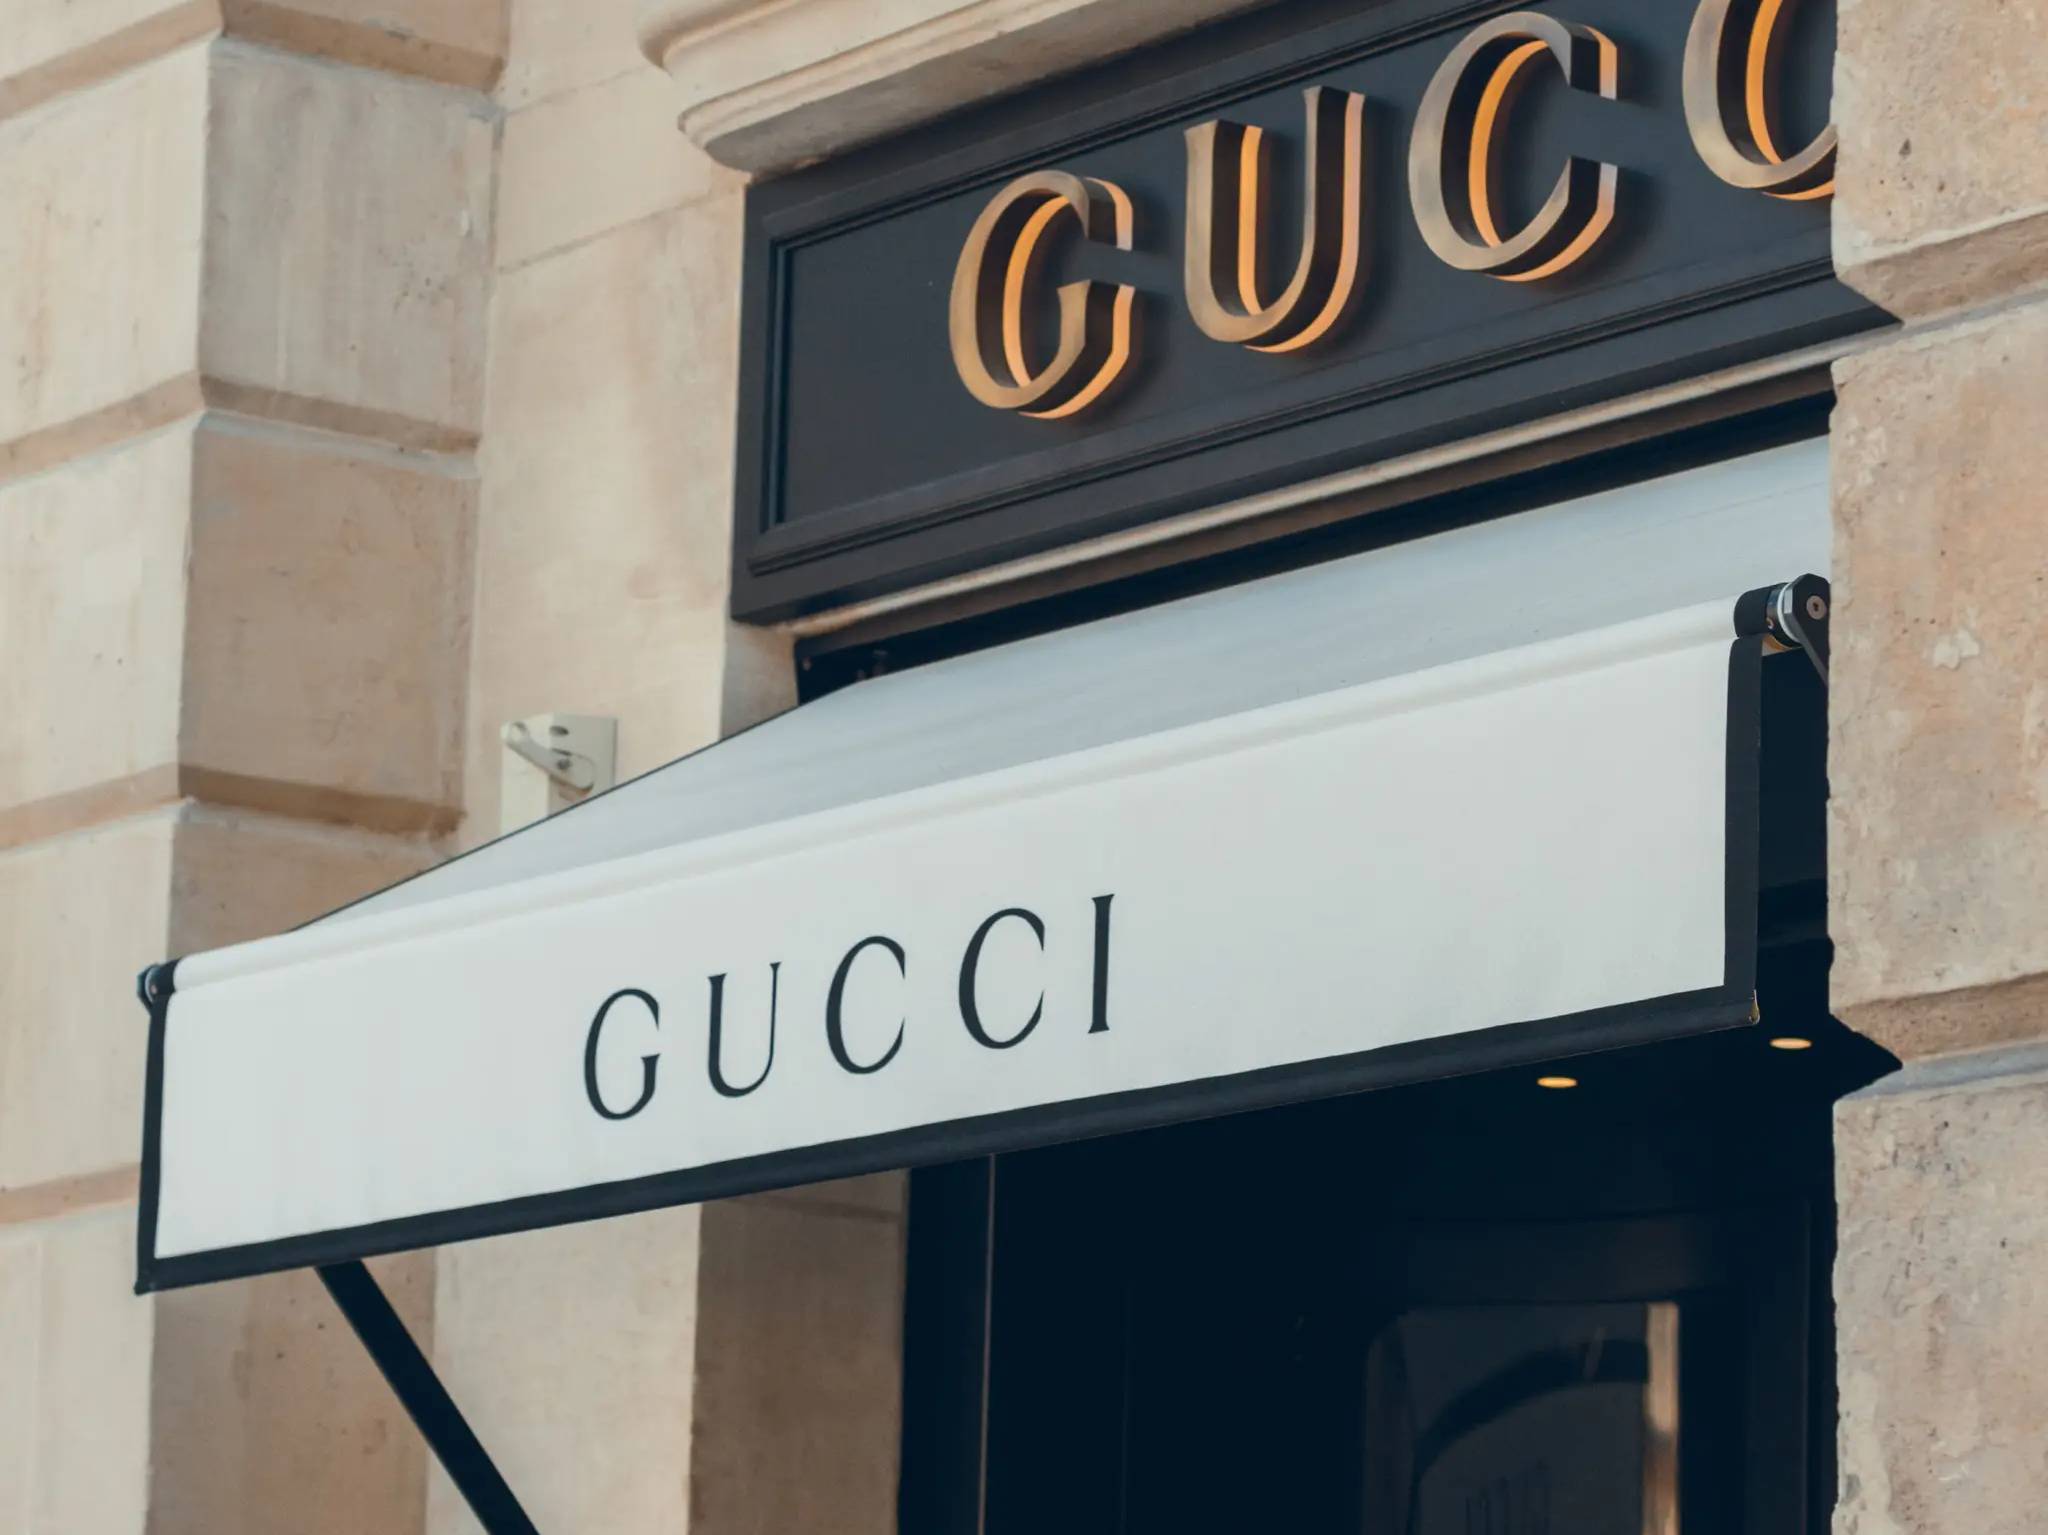 Gucci concept store elevates exclusivity in luxury